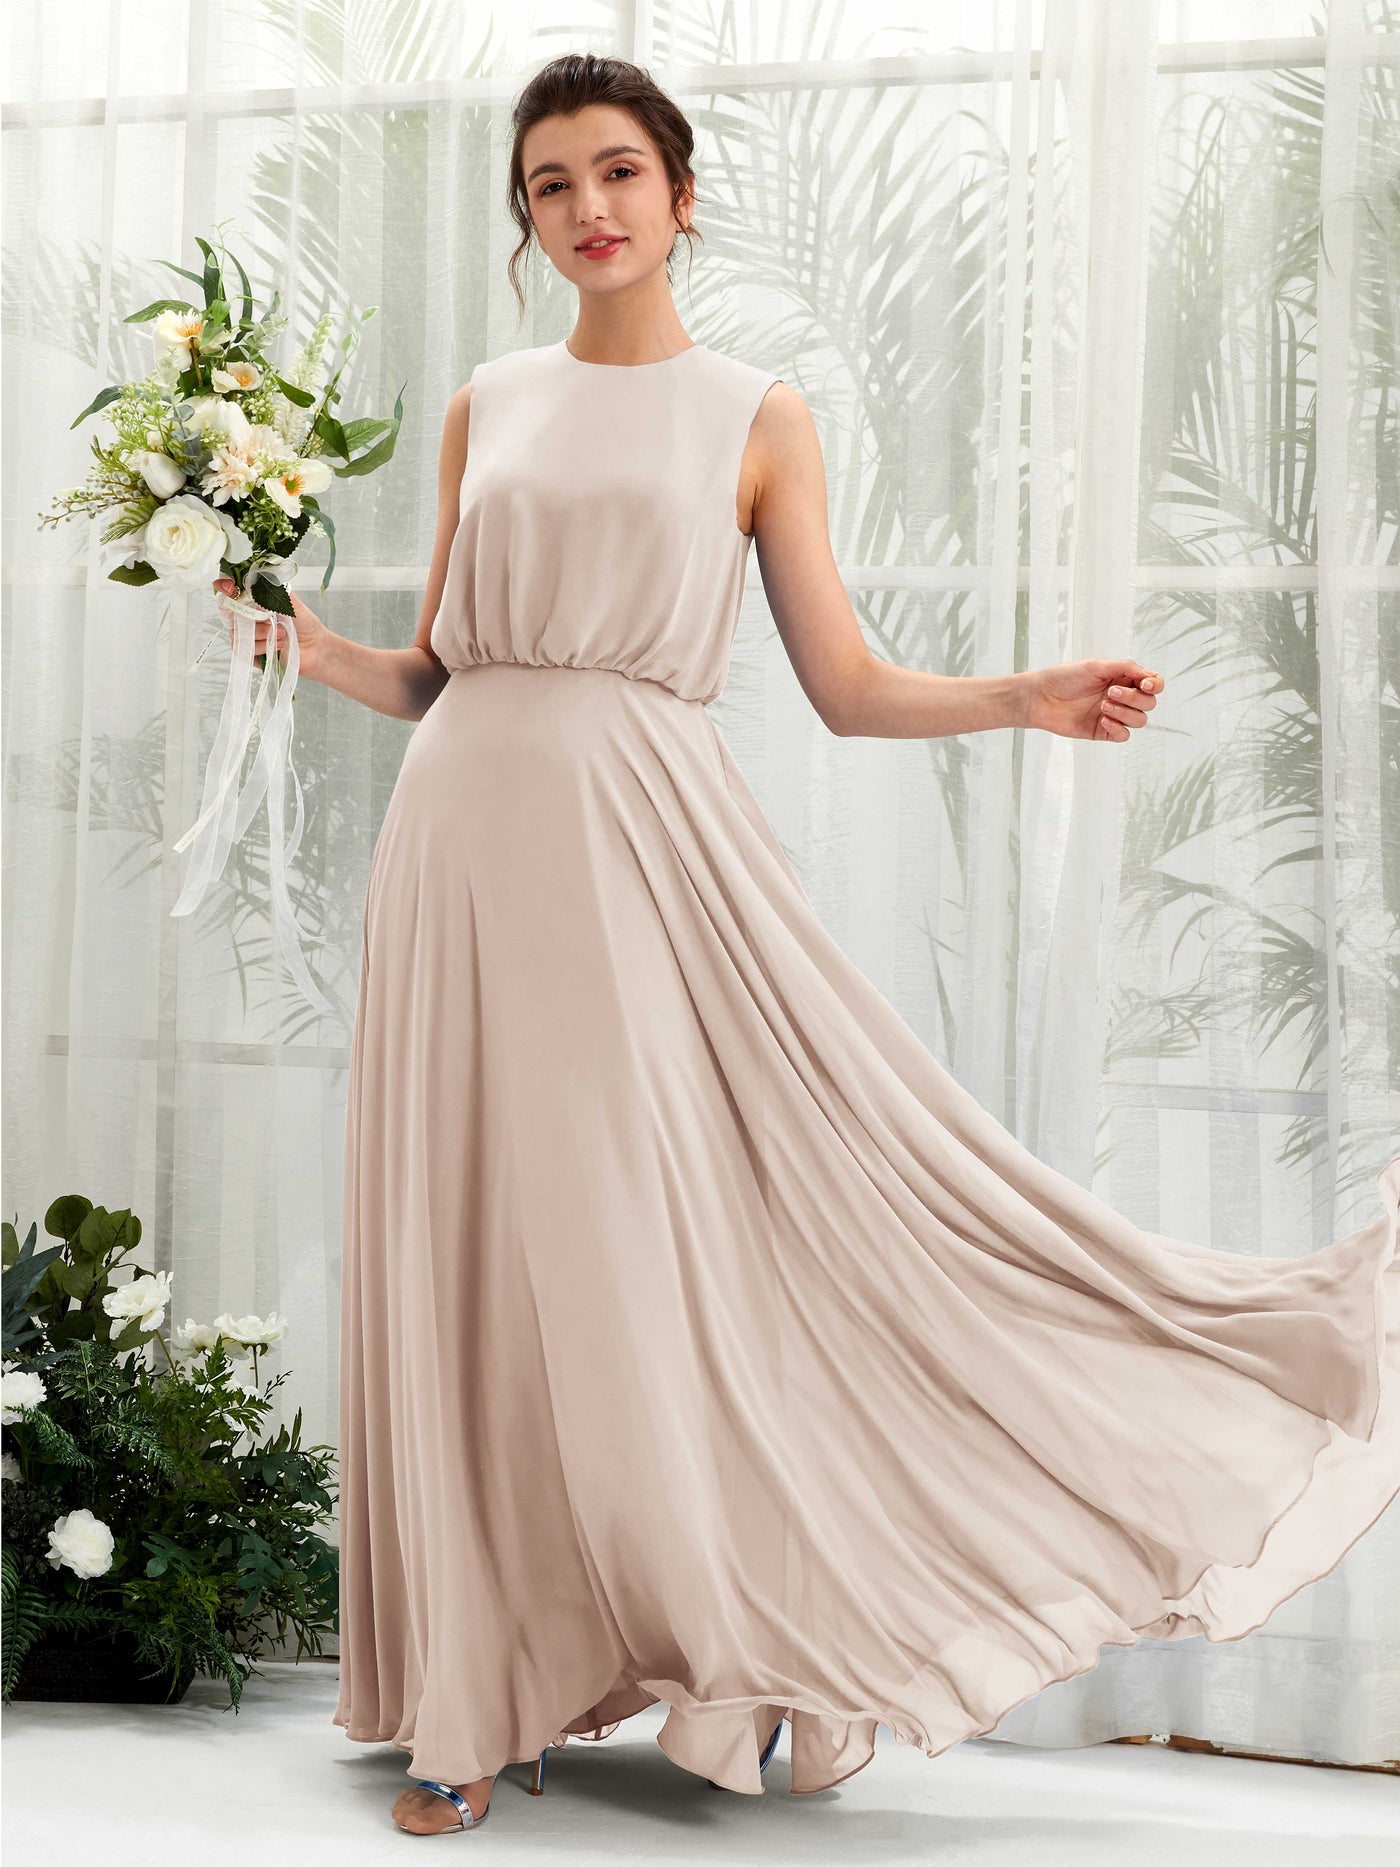 Champagne Bridesmaid Dresses Bridesmaid Dress A-line Chiffon Round Full Length Sleeveless Wedding Party Dress (81222816)#color_champagne